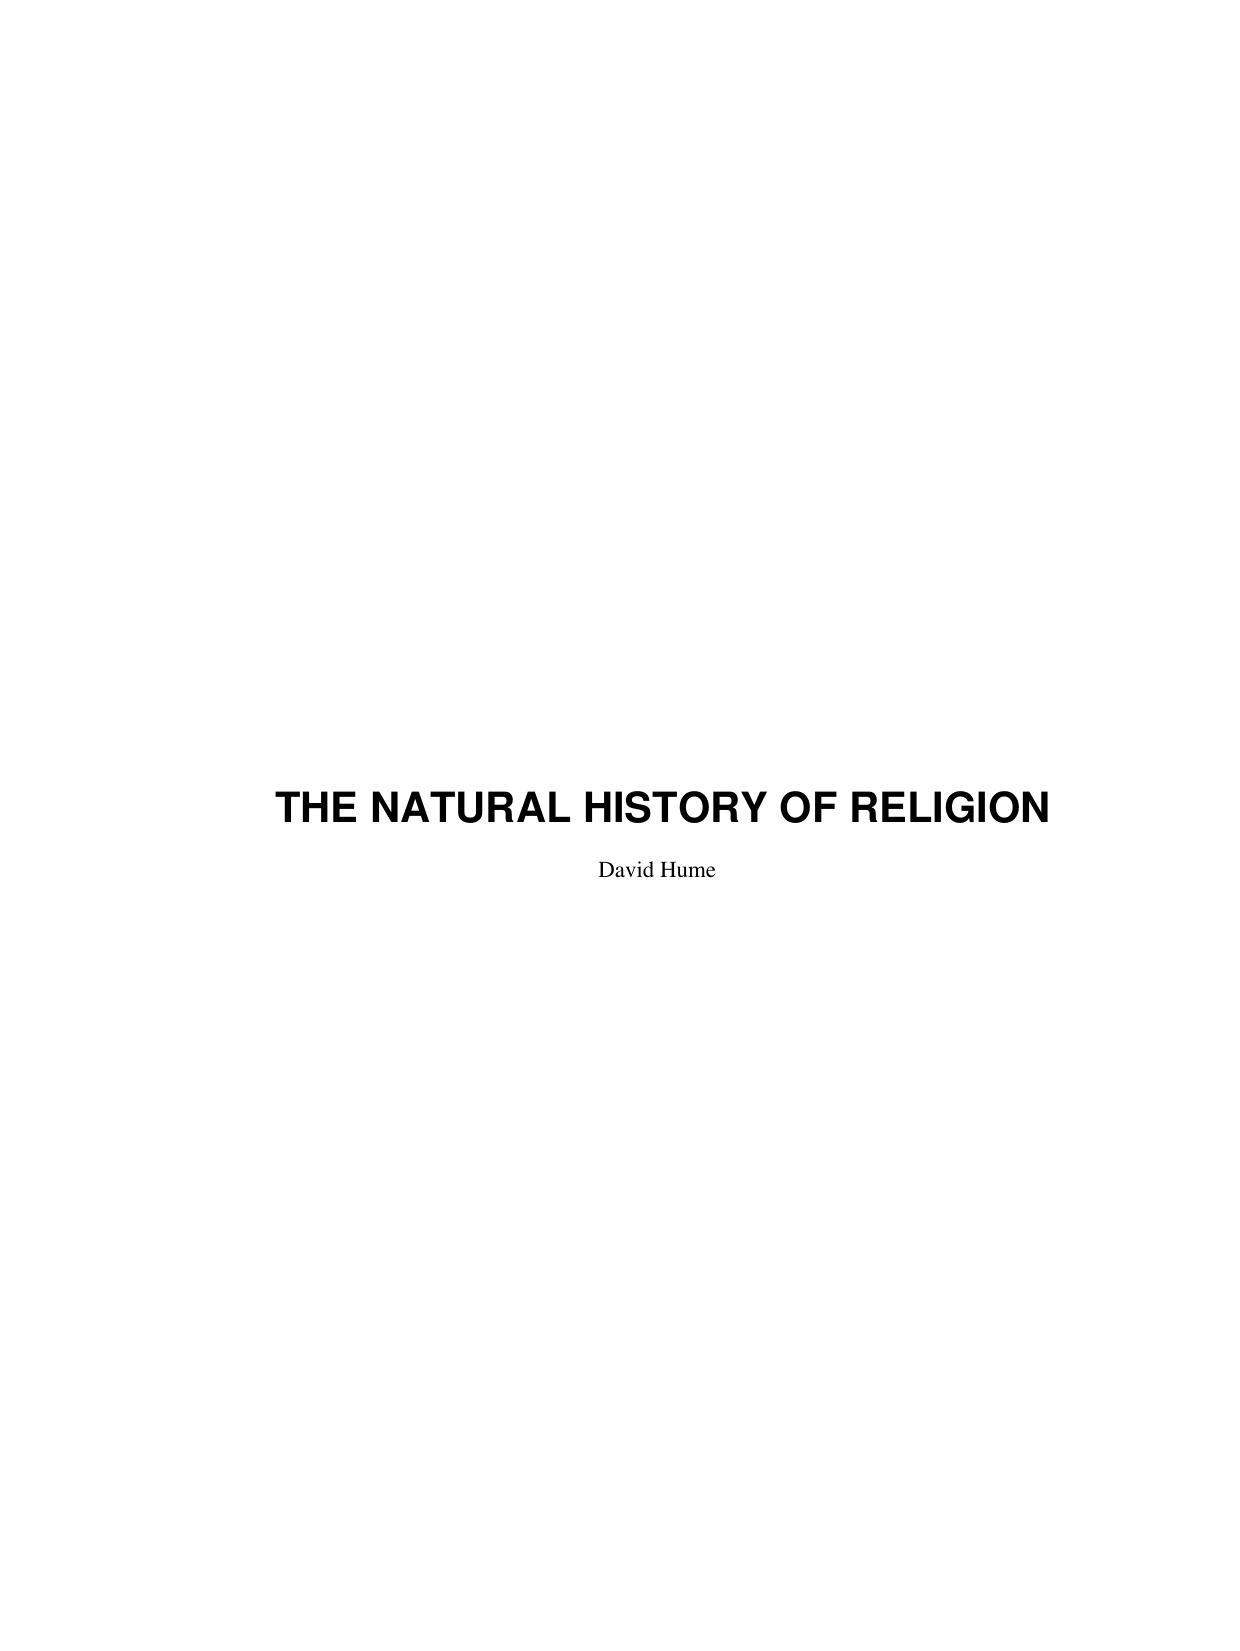 The Natural History Oo Religion - TOC